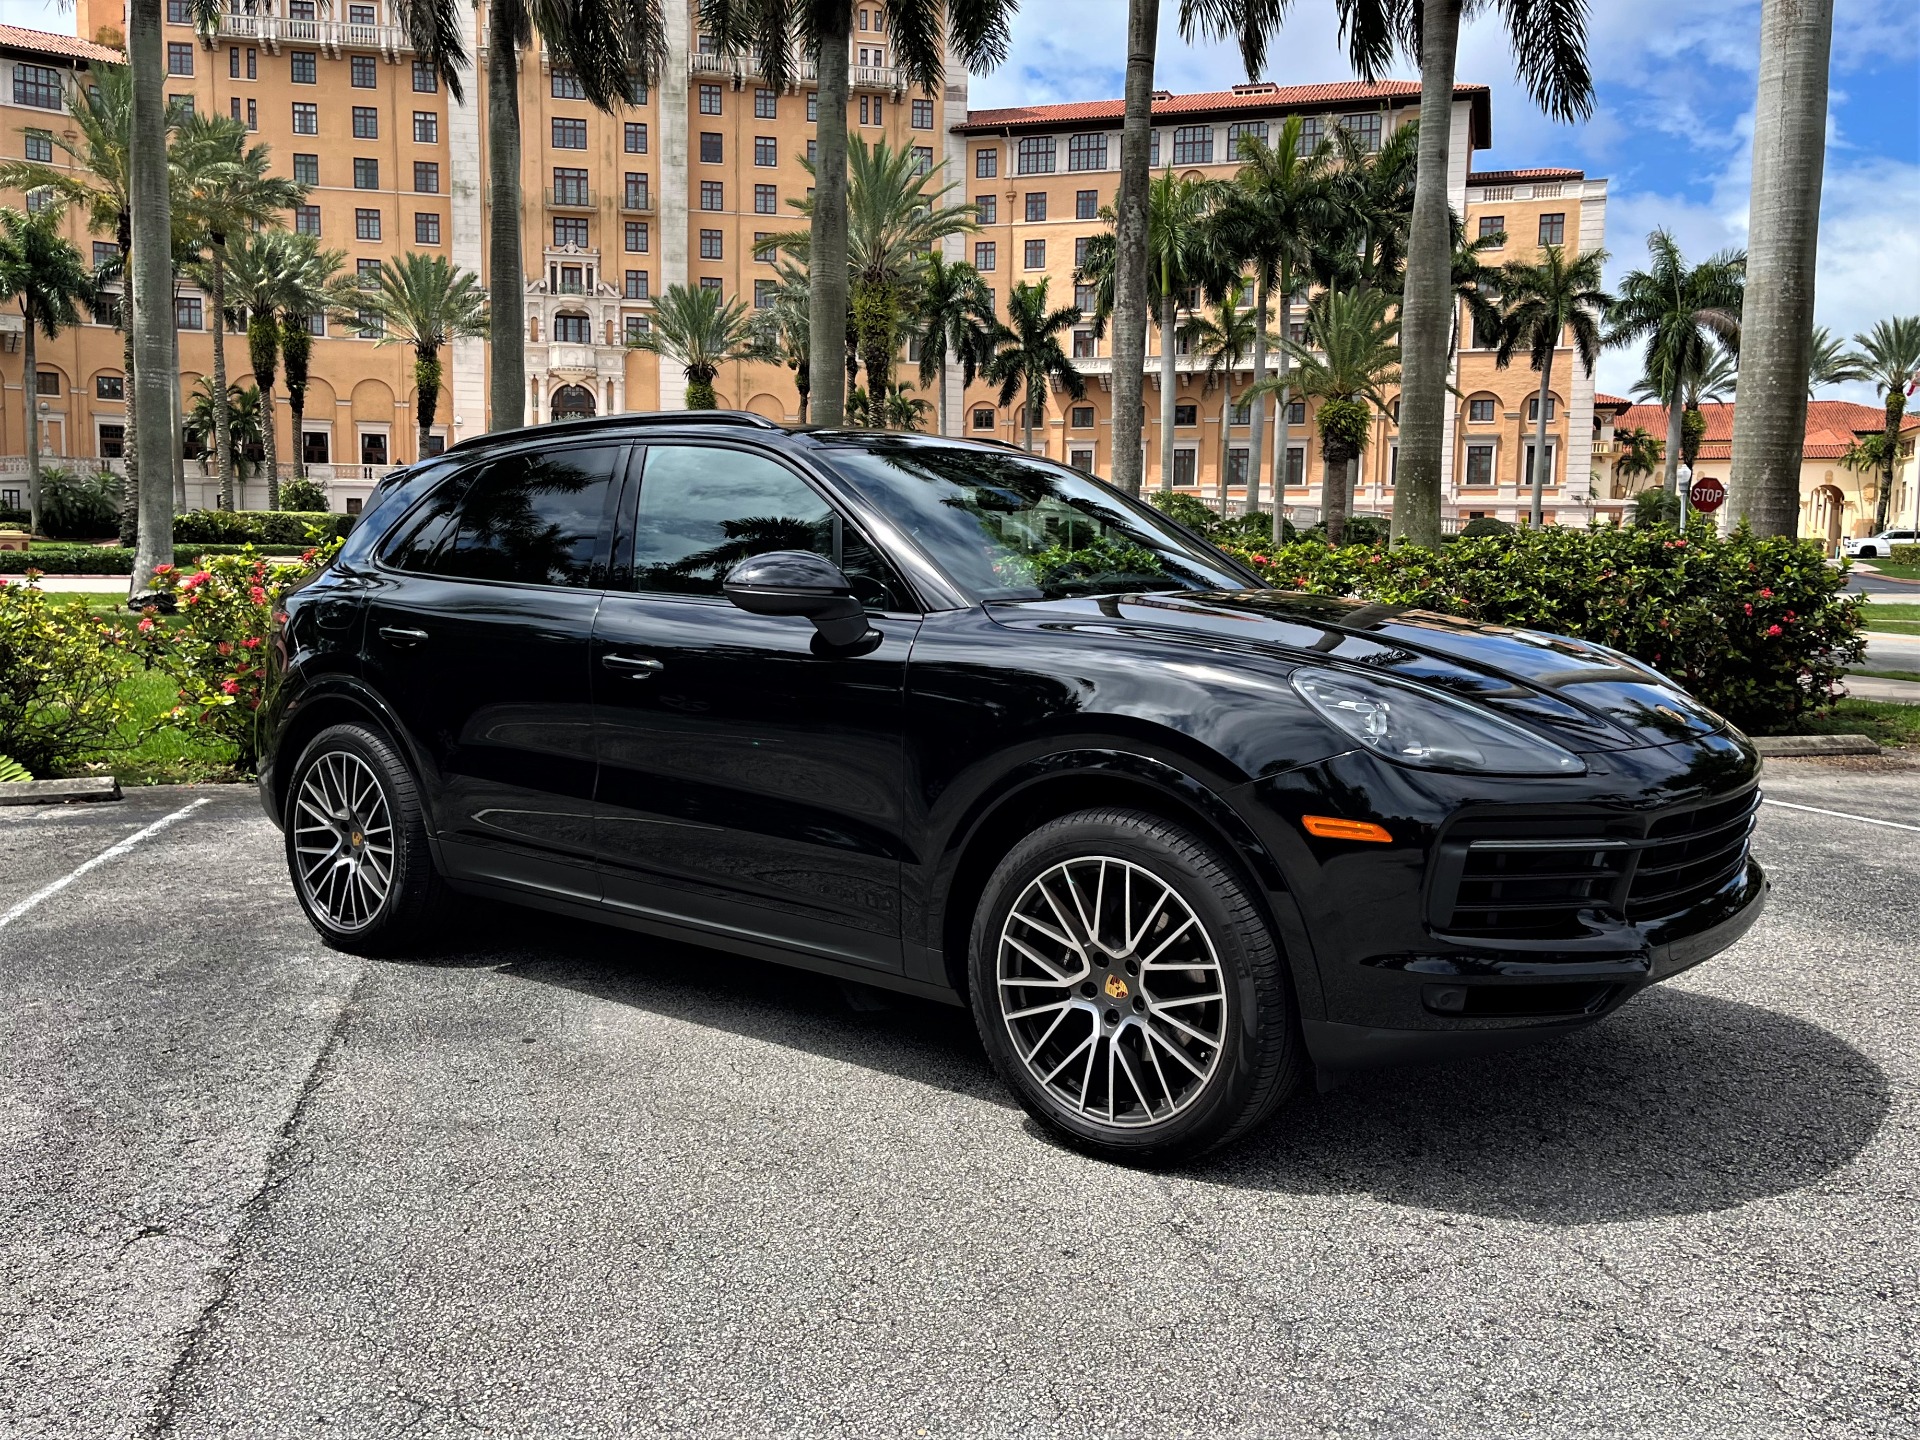 Used 2020 Porsche Cayenne for sale $78,850 at The Gables Sports Cars in Miami FL 33146 2